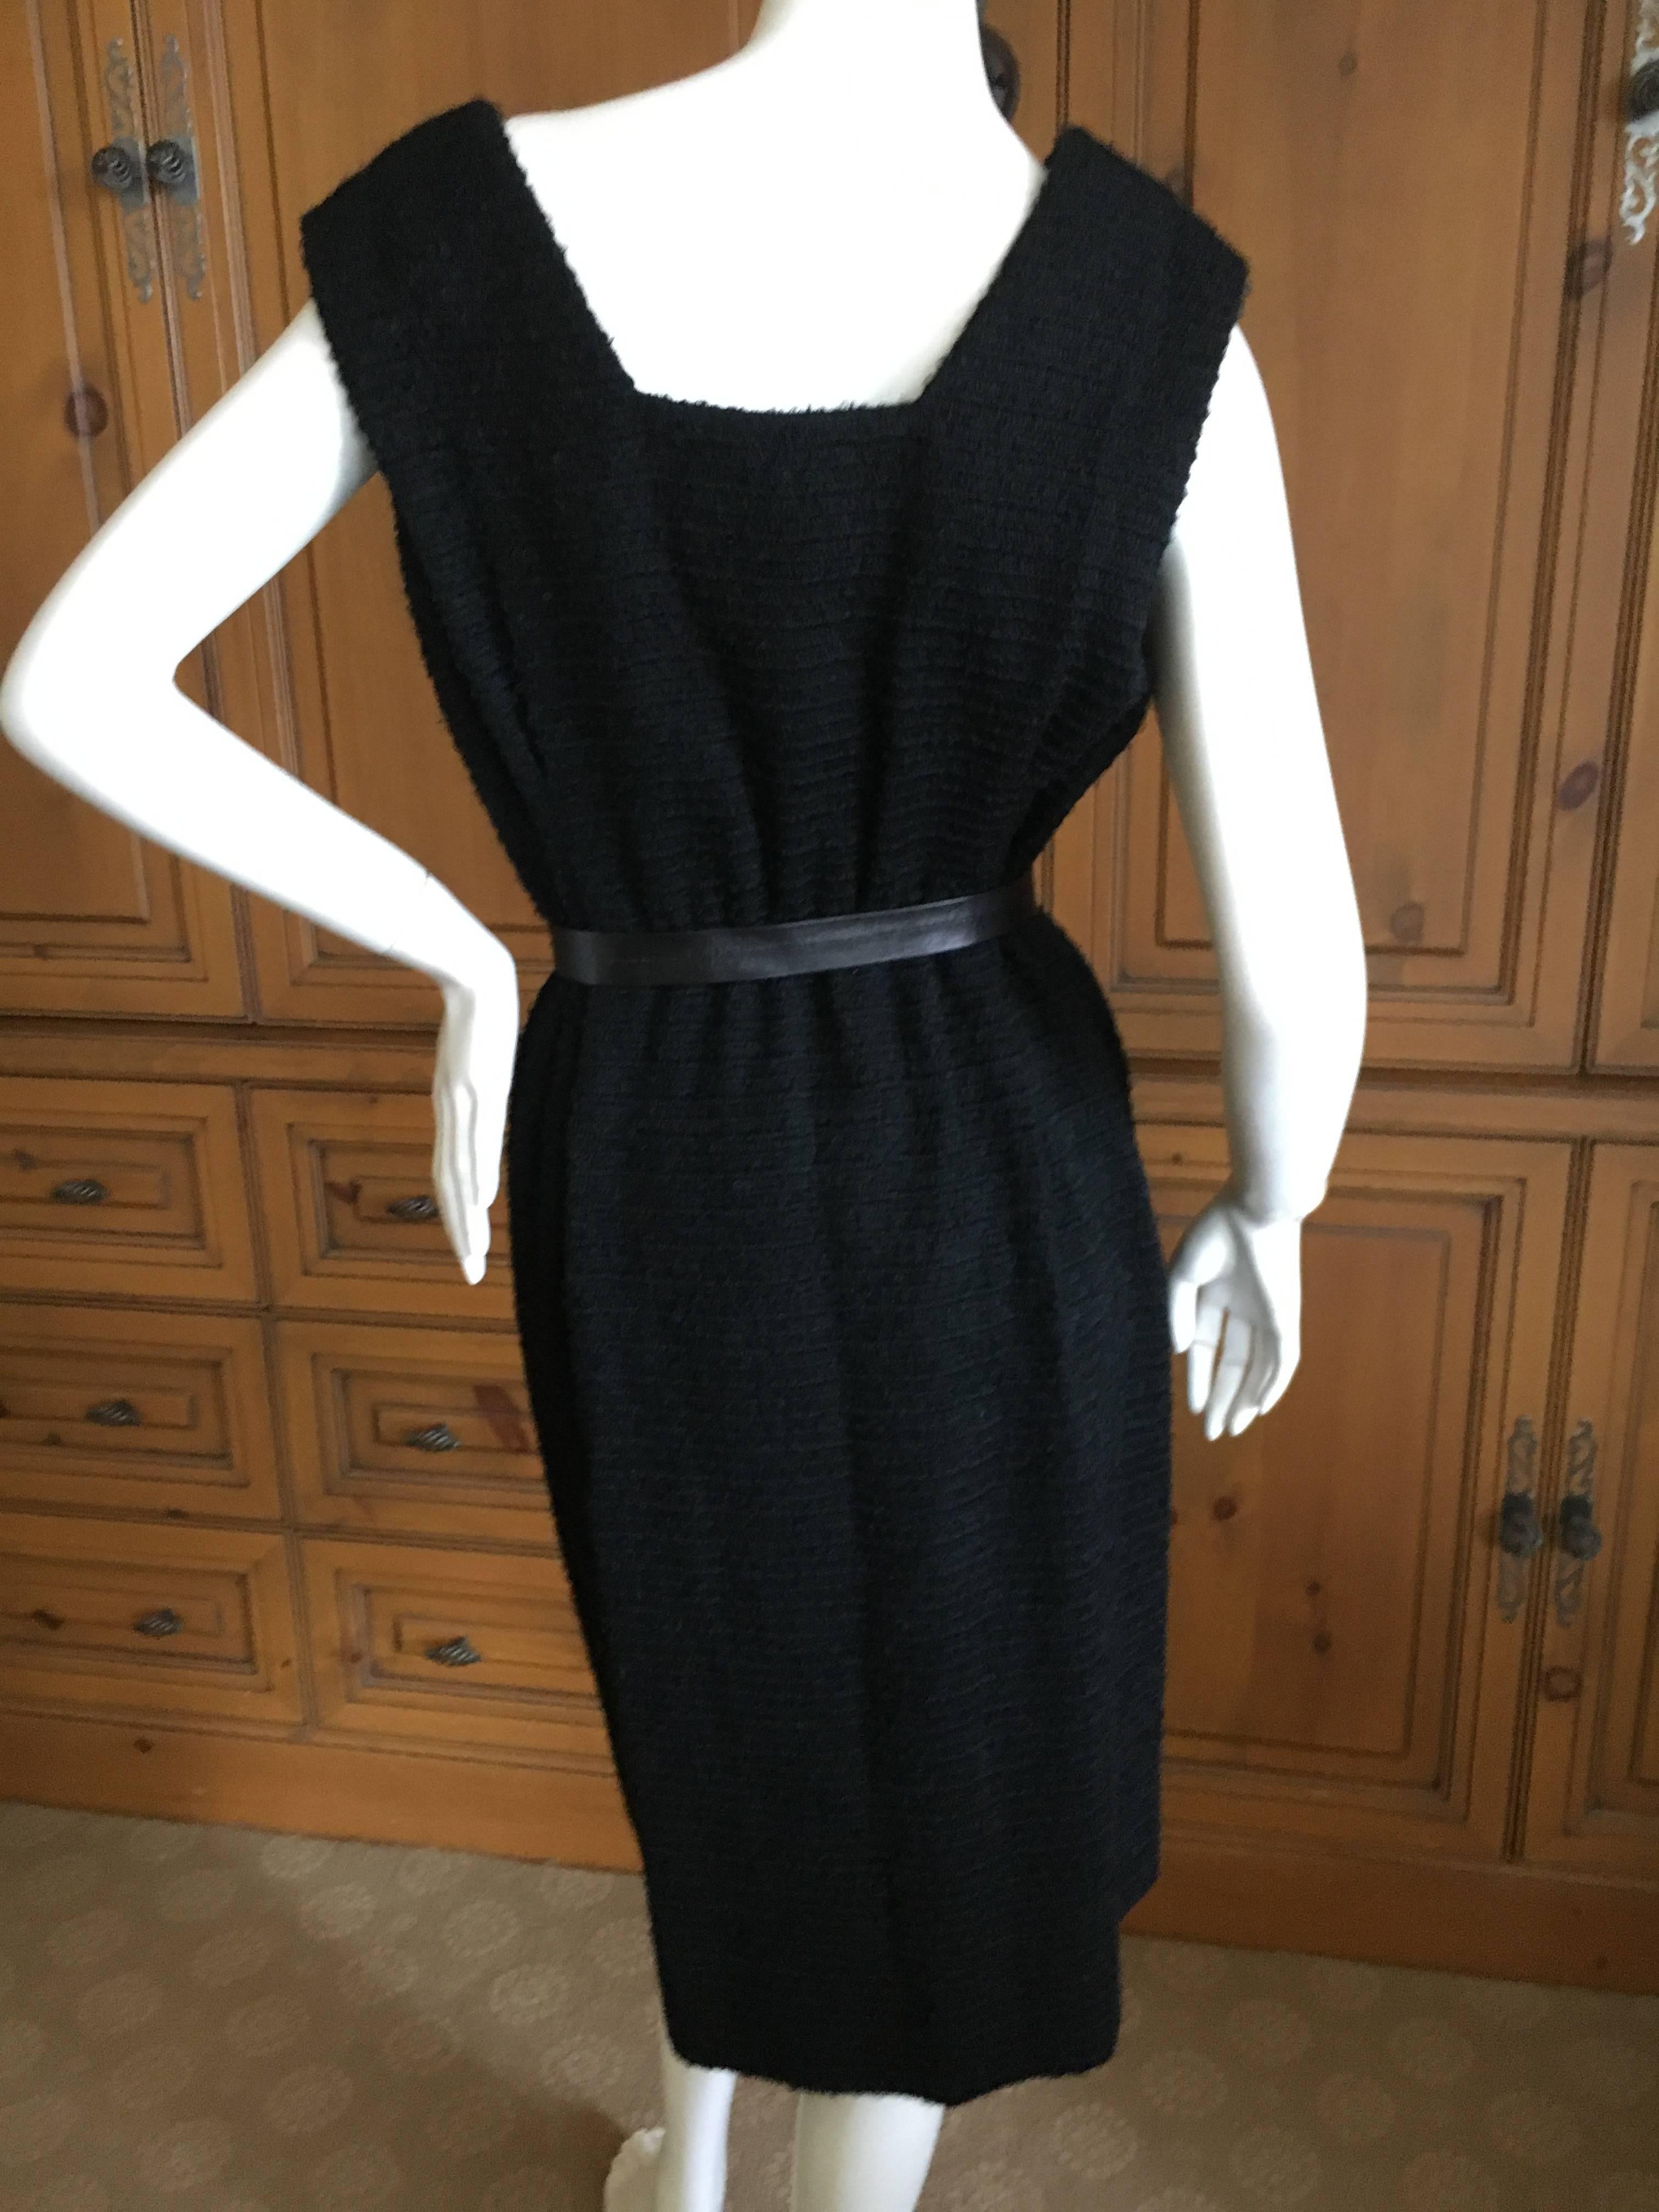 Galanos 1965 Little Black Dress with Leather Tie Belt.
Nubby wool with buttons down the front, lined in silk.
Bust 40"
Waist 26"
Hips 40"
Length 42"
Excellent Condition